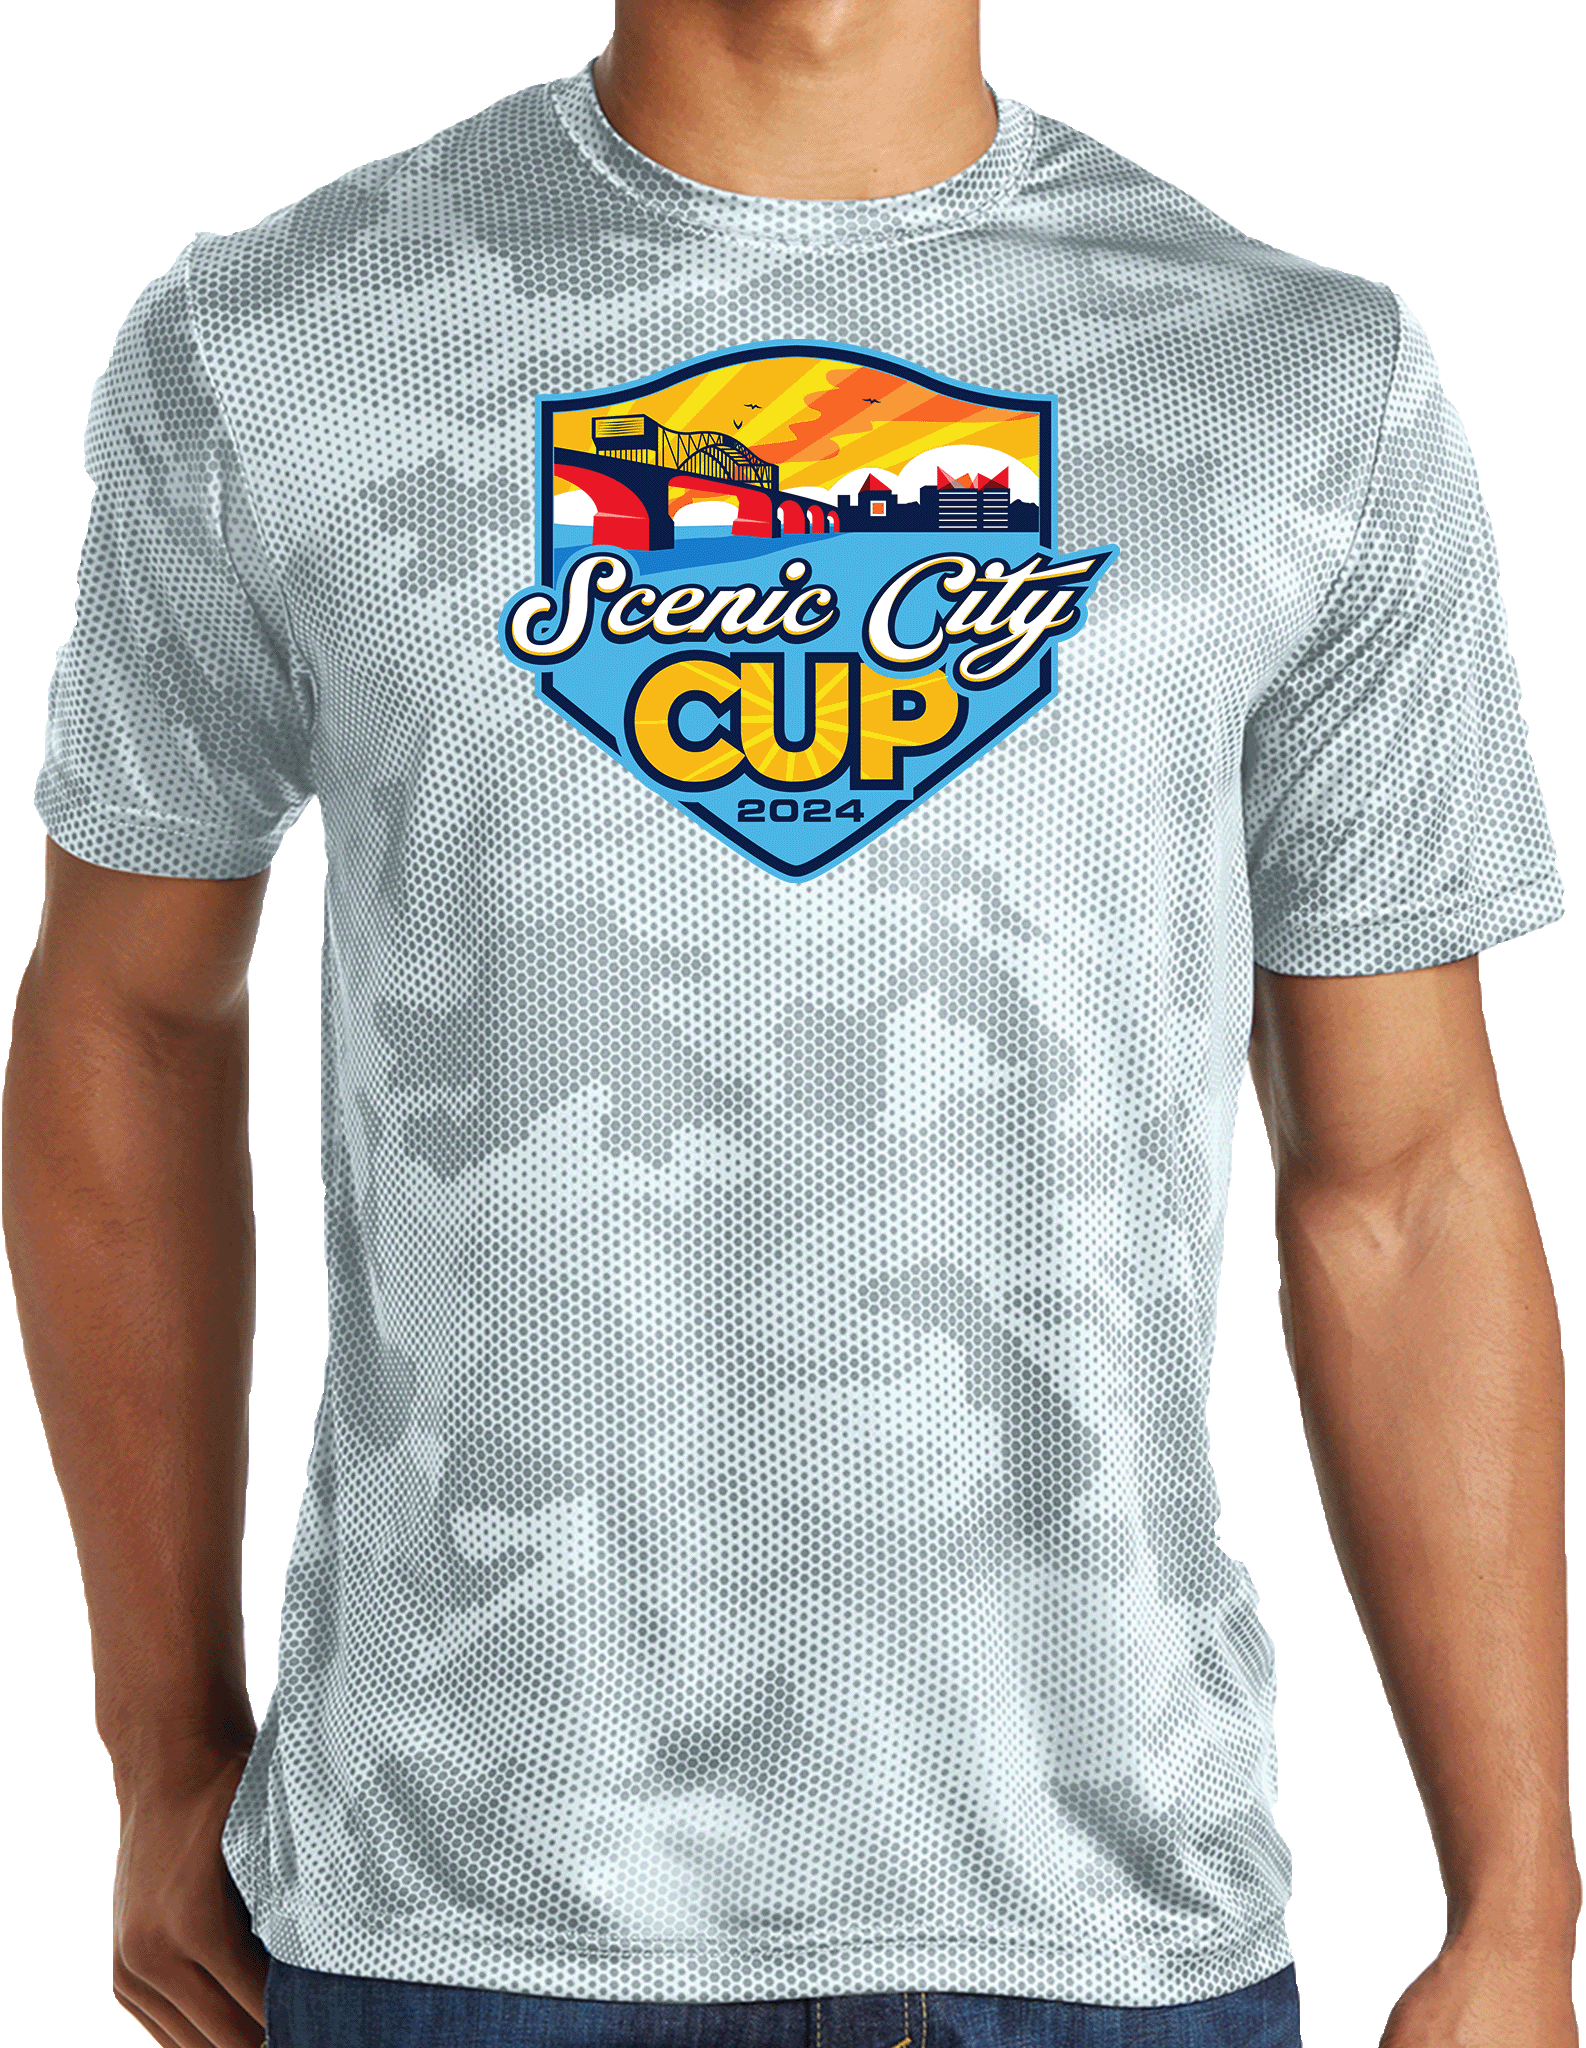 Performance Shirts - 2024 Scenic City Cup